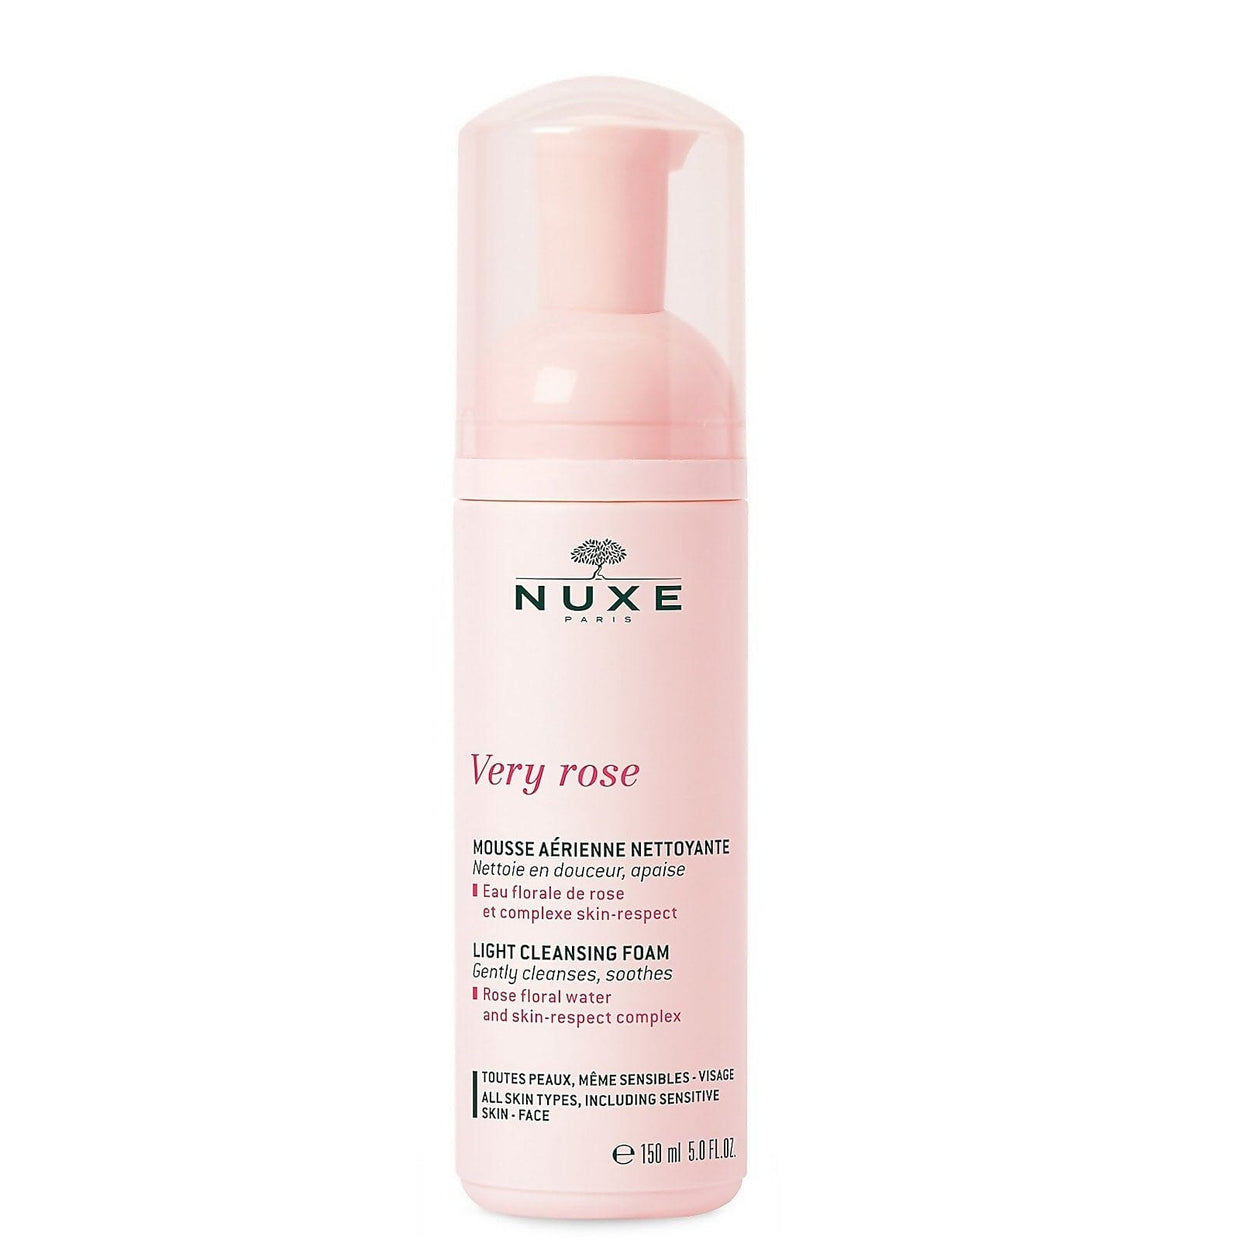 Nuxe Very Rose Light Cleansing Foam Nuxe 5.0 oz. (150ml) Shop at Exclusive Beauty Club